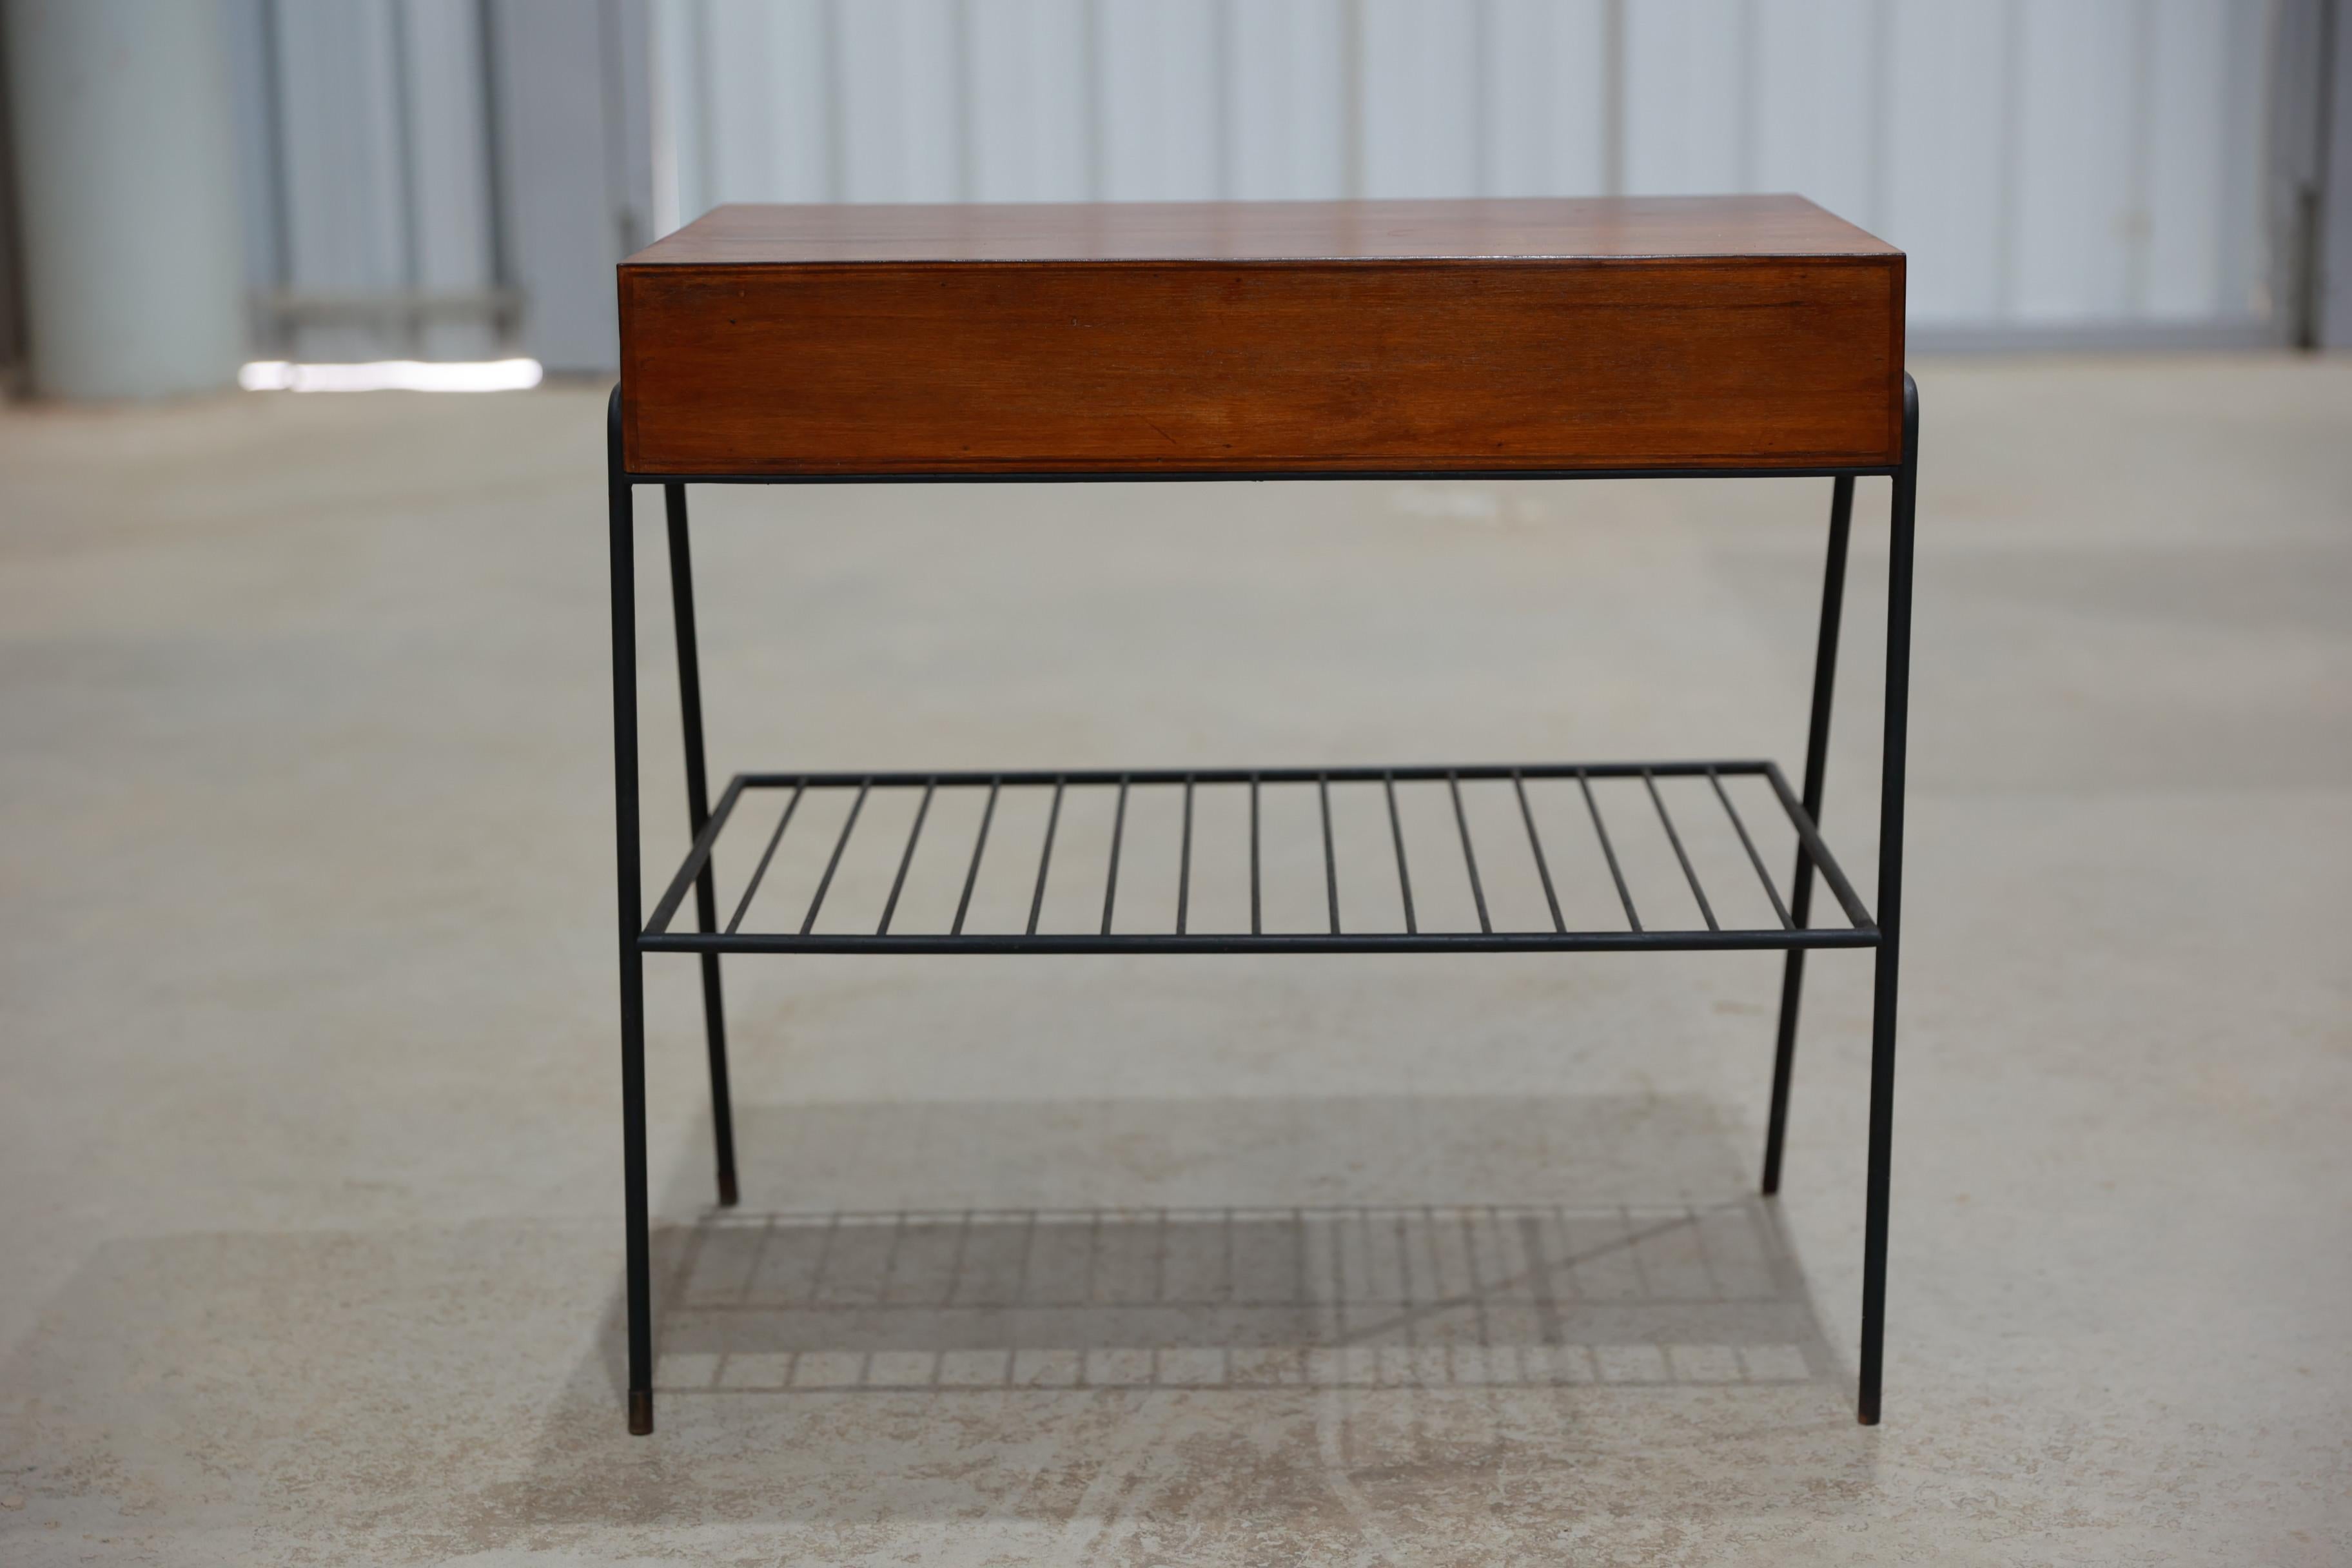 Brazilian Modern Side table in Hardwood and Metal, Unknown, c. 1950 In Good Condition For Sale In New York, NY